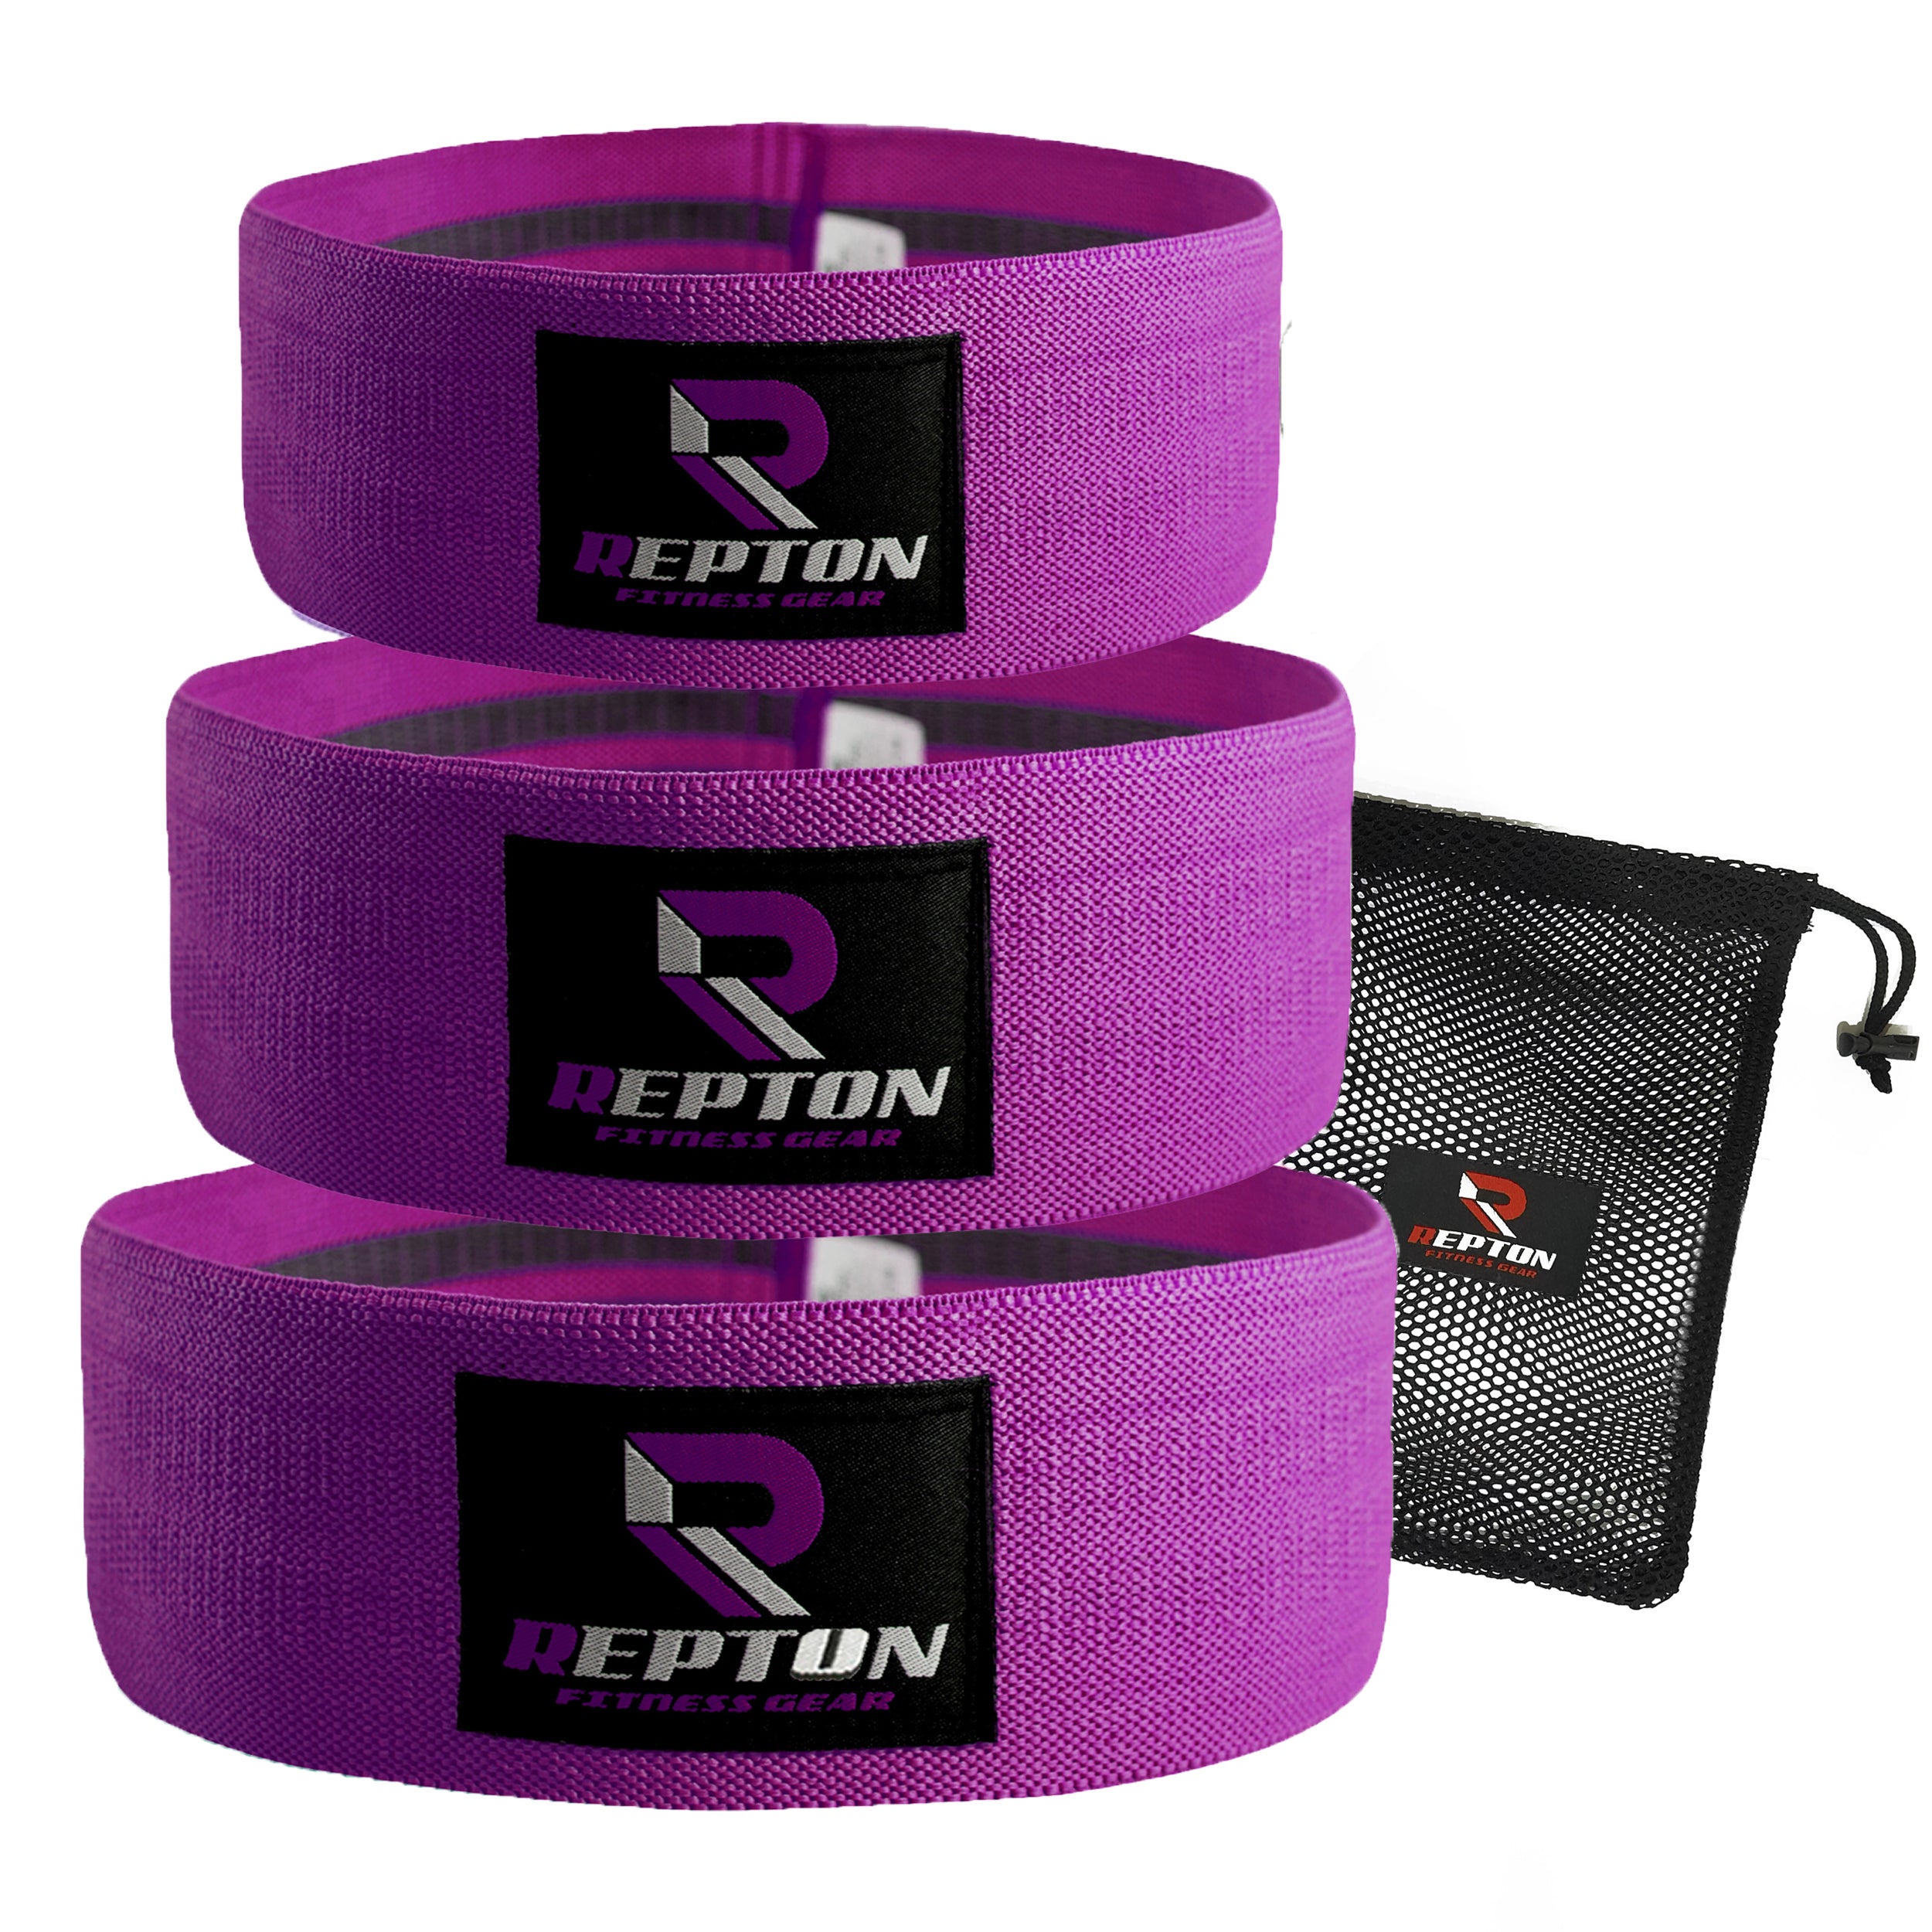 3 Sets Resistance Bands for Glutes, Hips and Legs Exercise Repton Fitness Gear